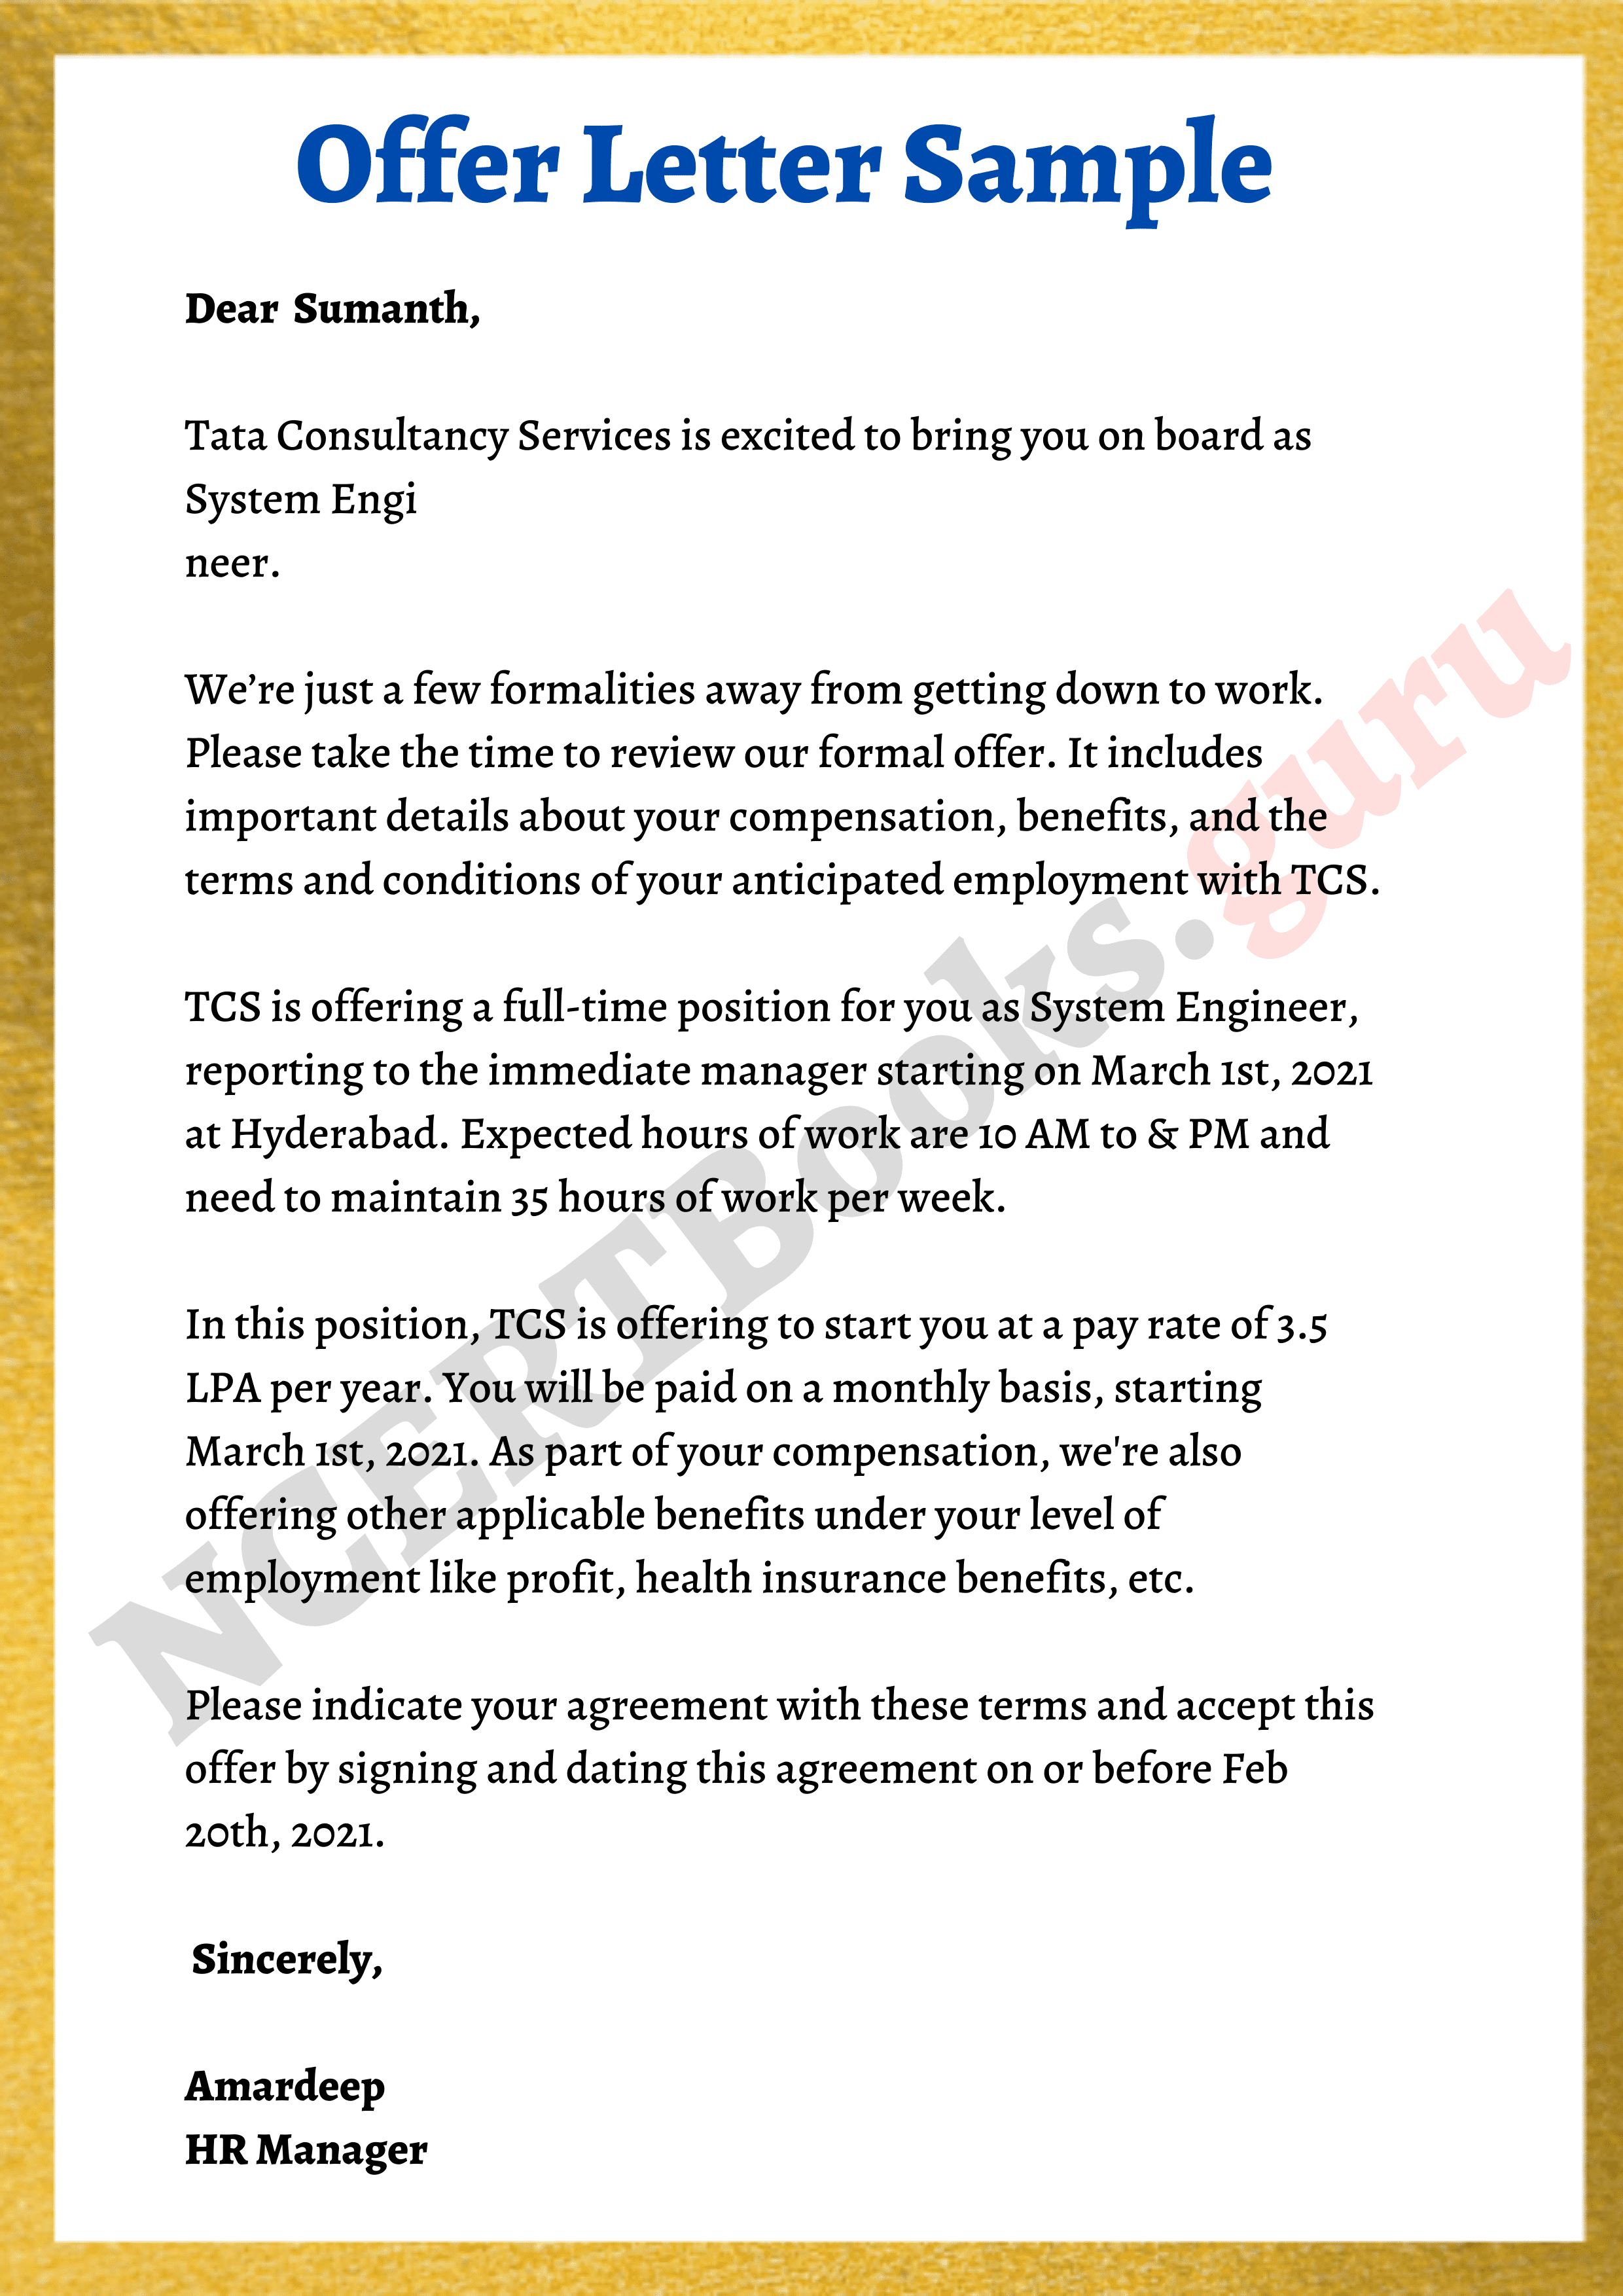 English Offer Letter - Hot Bubble